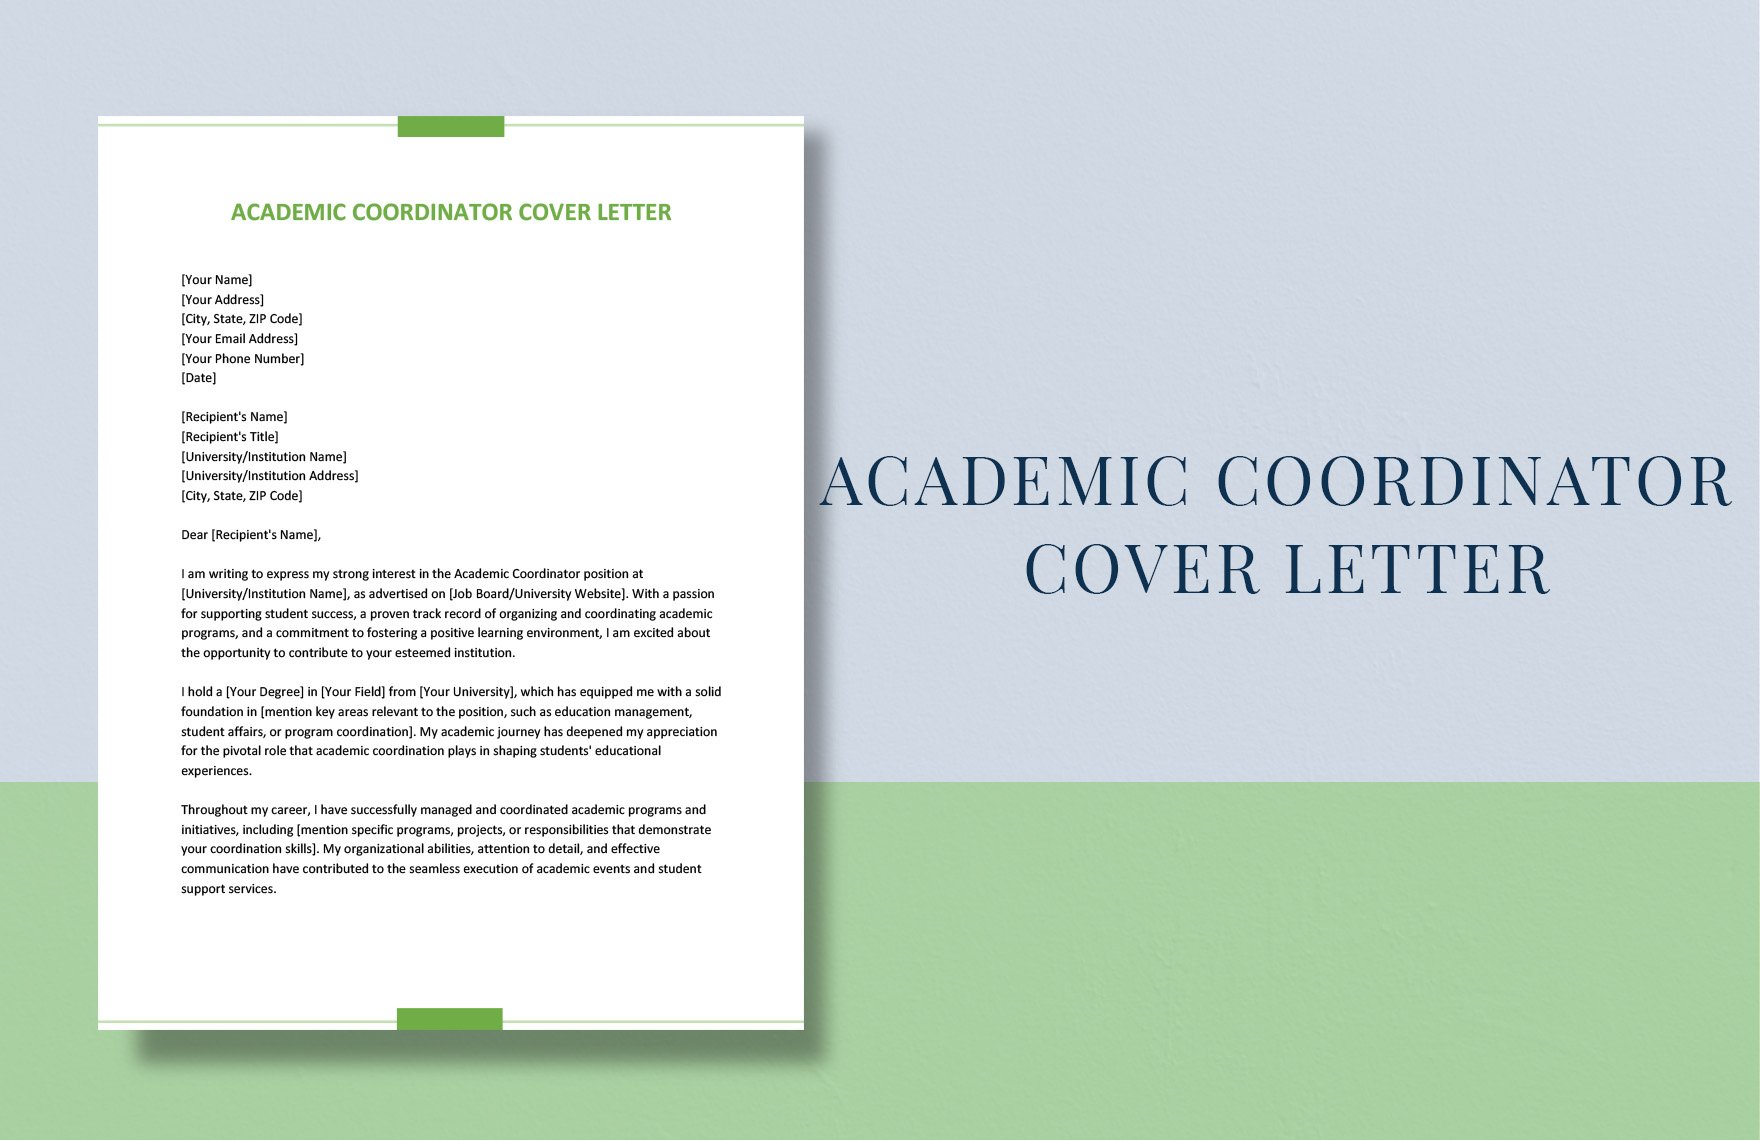 Academic Coordinator Cover Letter